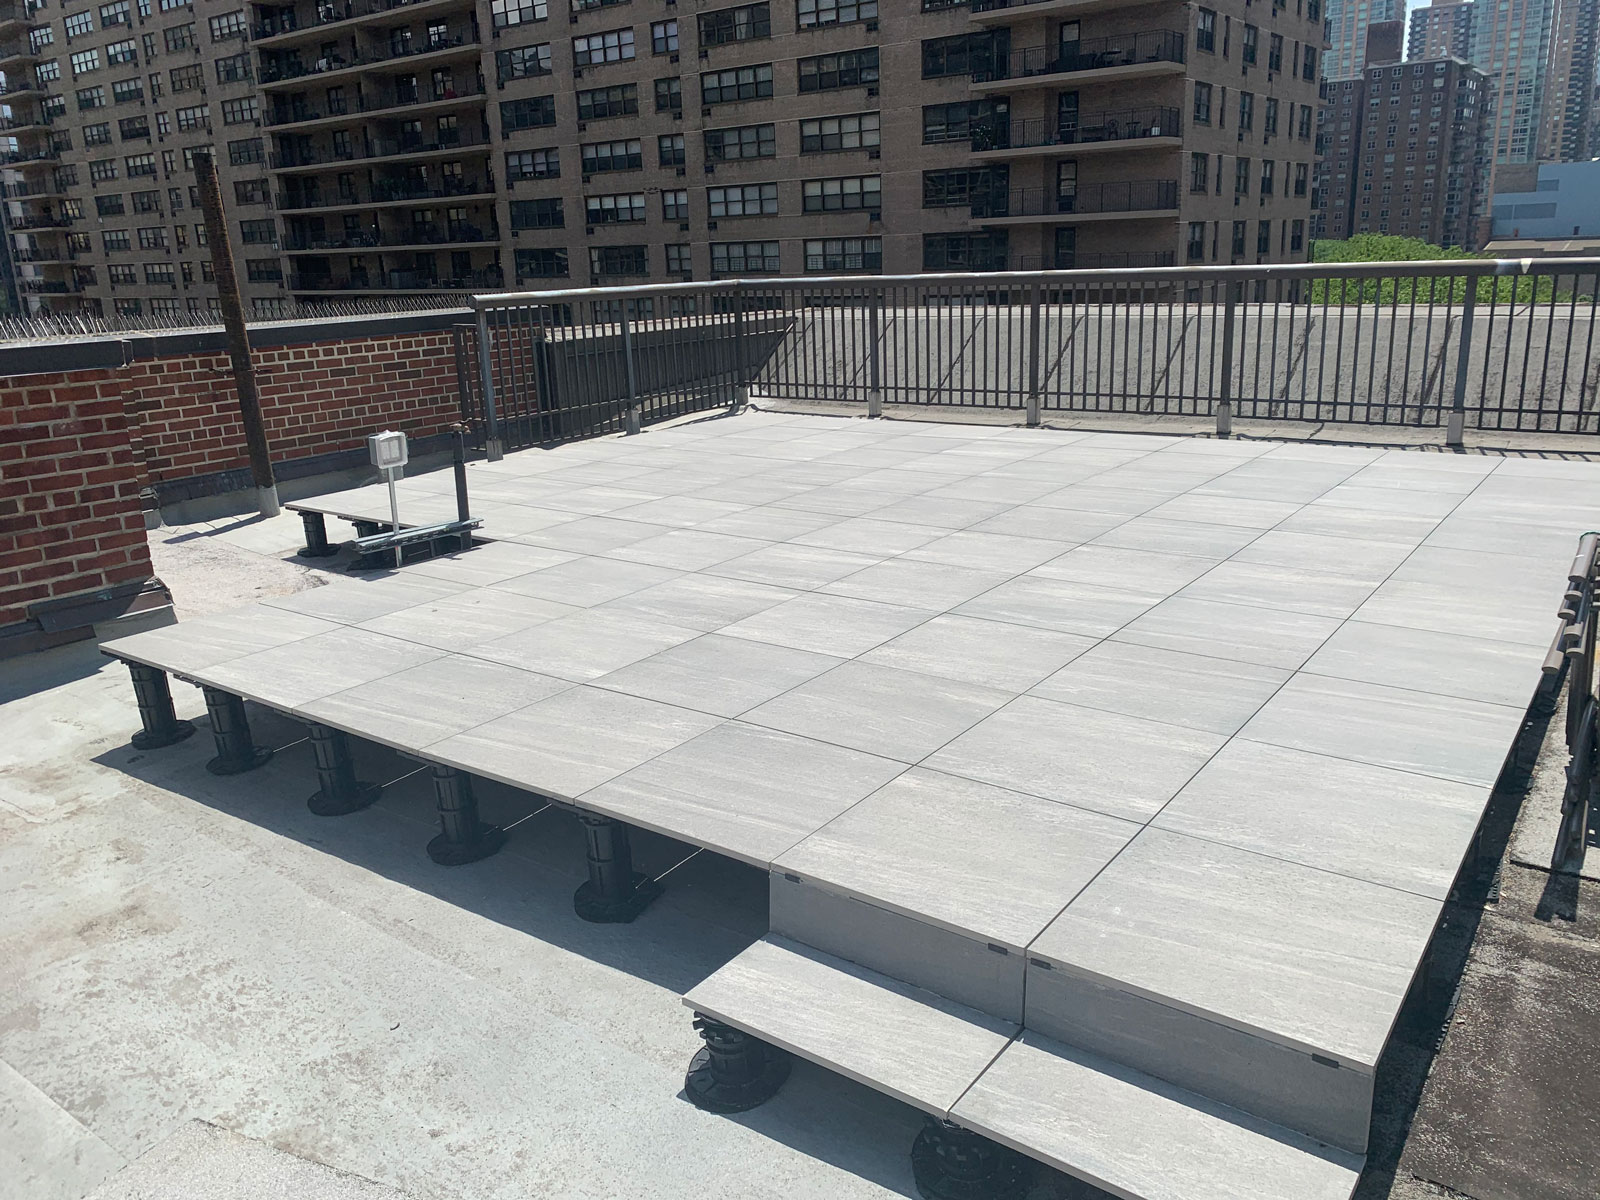 New York Roof Terrace on StrataRise 4166 Self-Levelling Pedestals